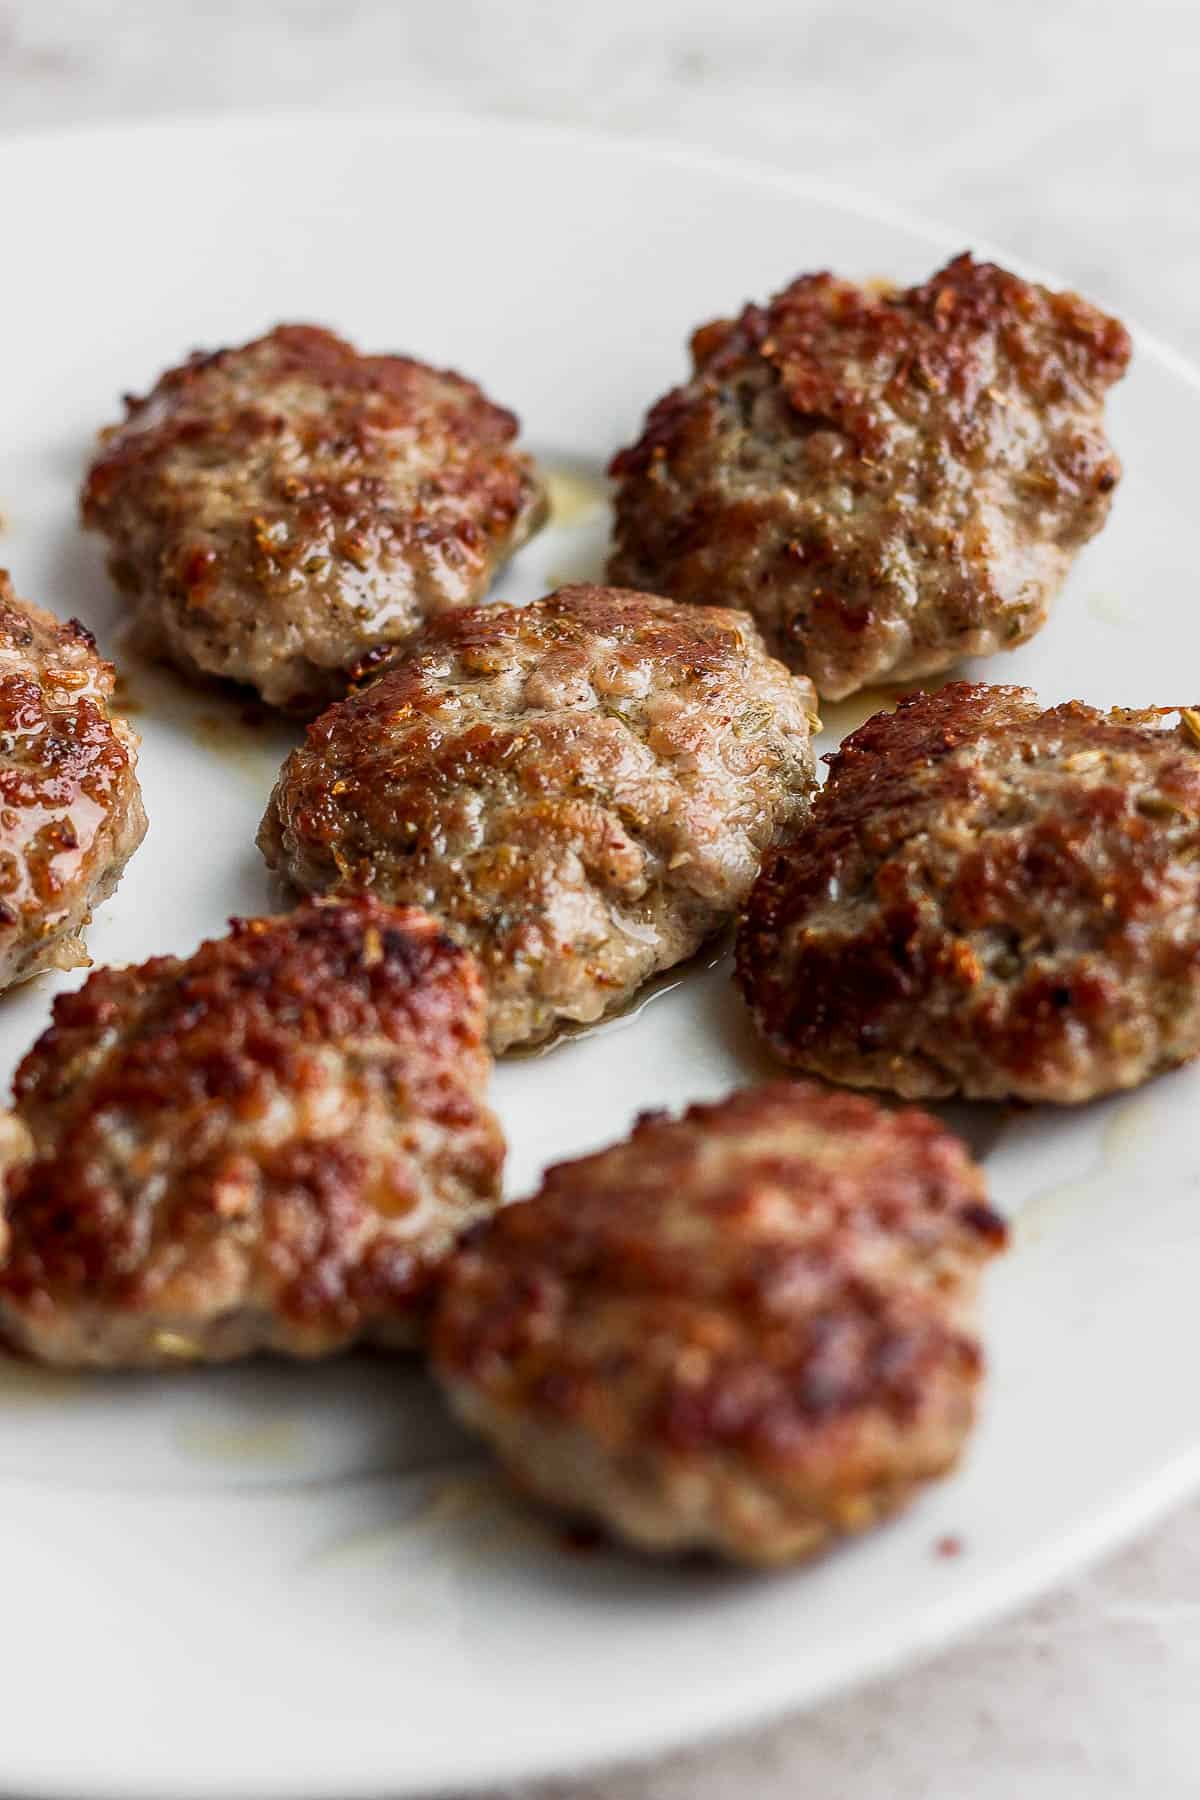 Cooked sausage patties on a white plate.